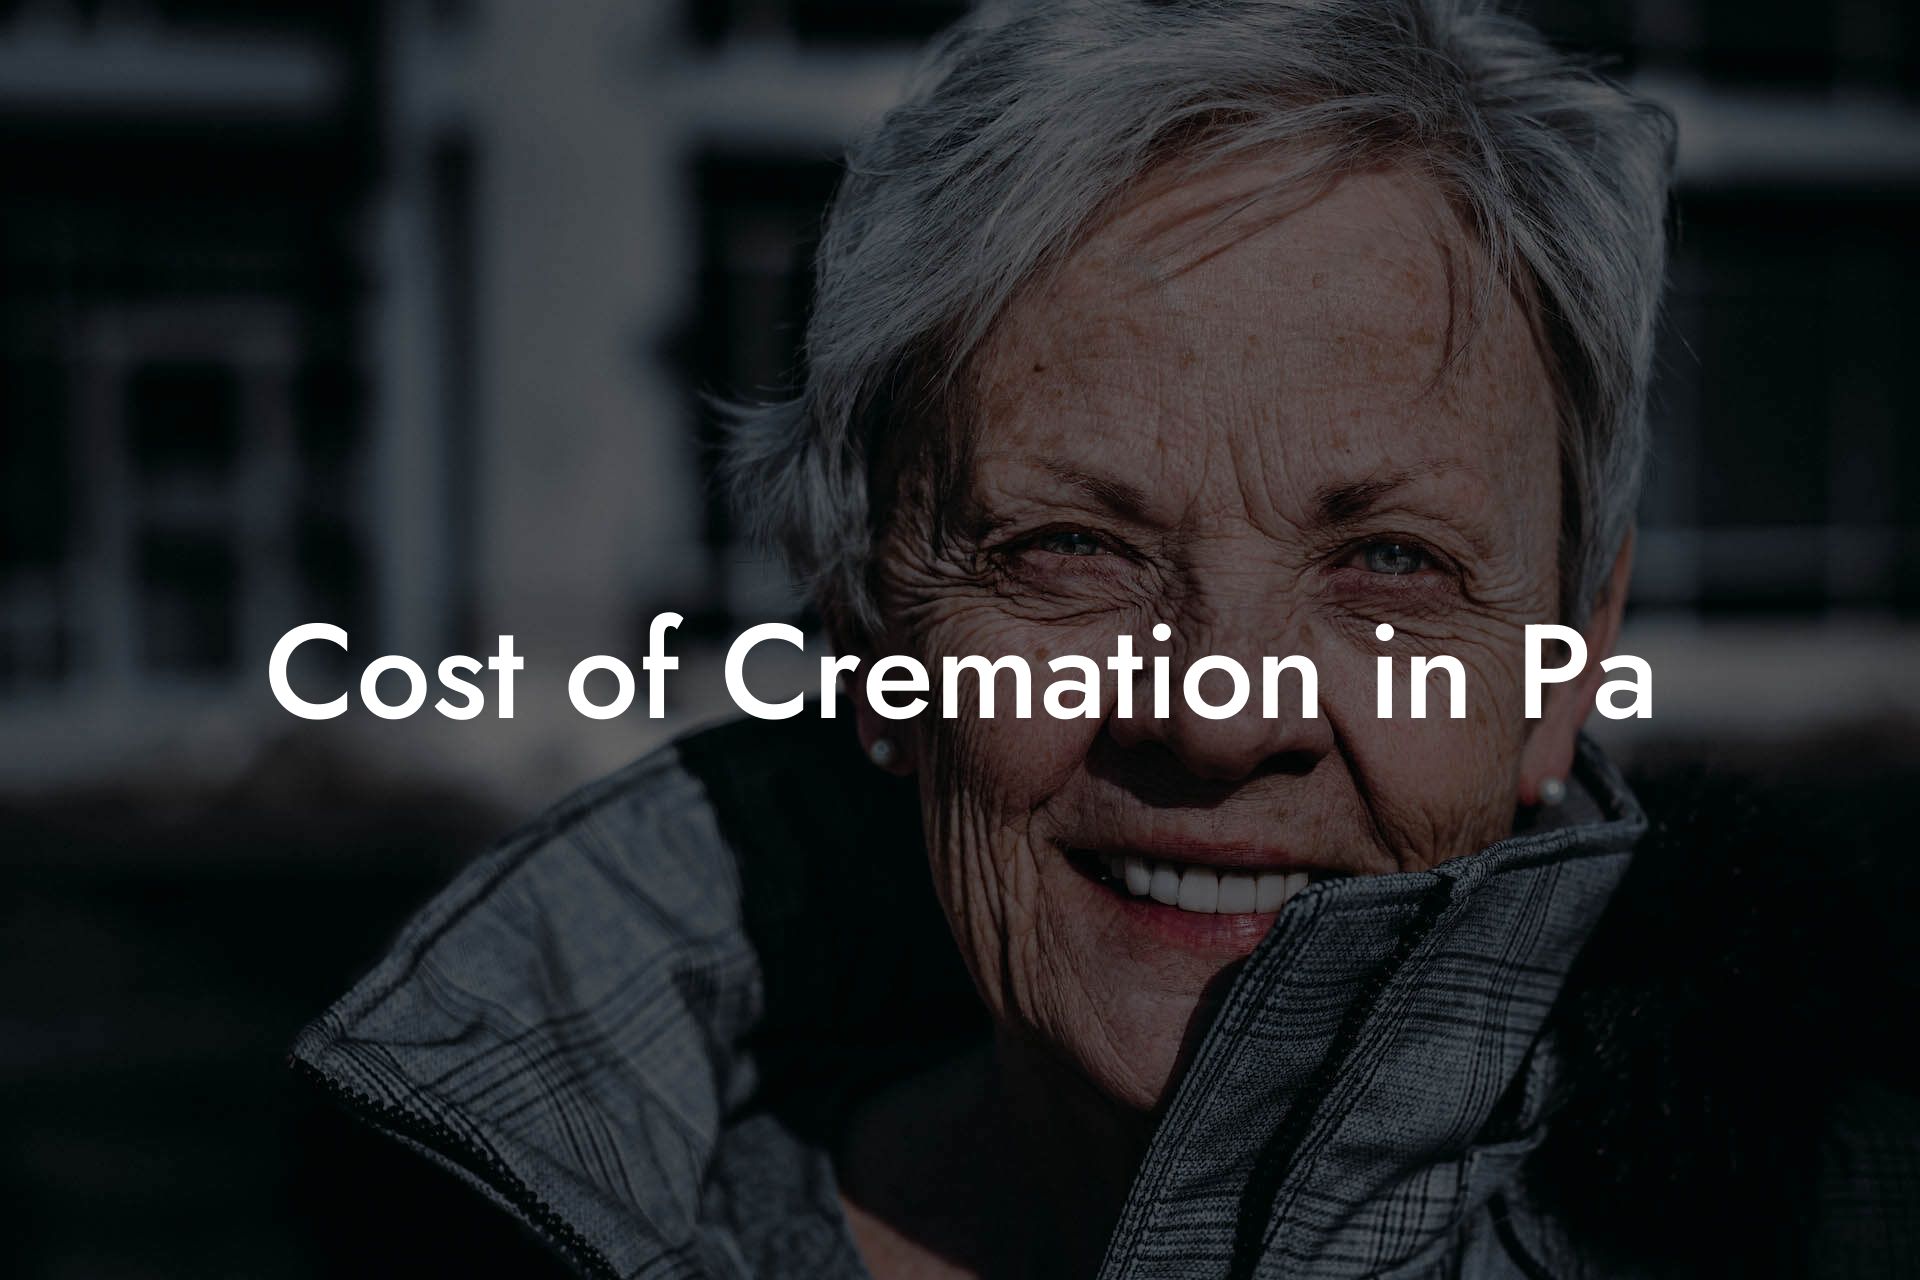 Cost of Cremation in Pa